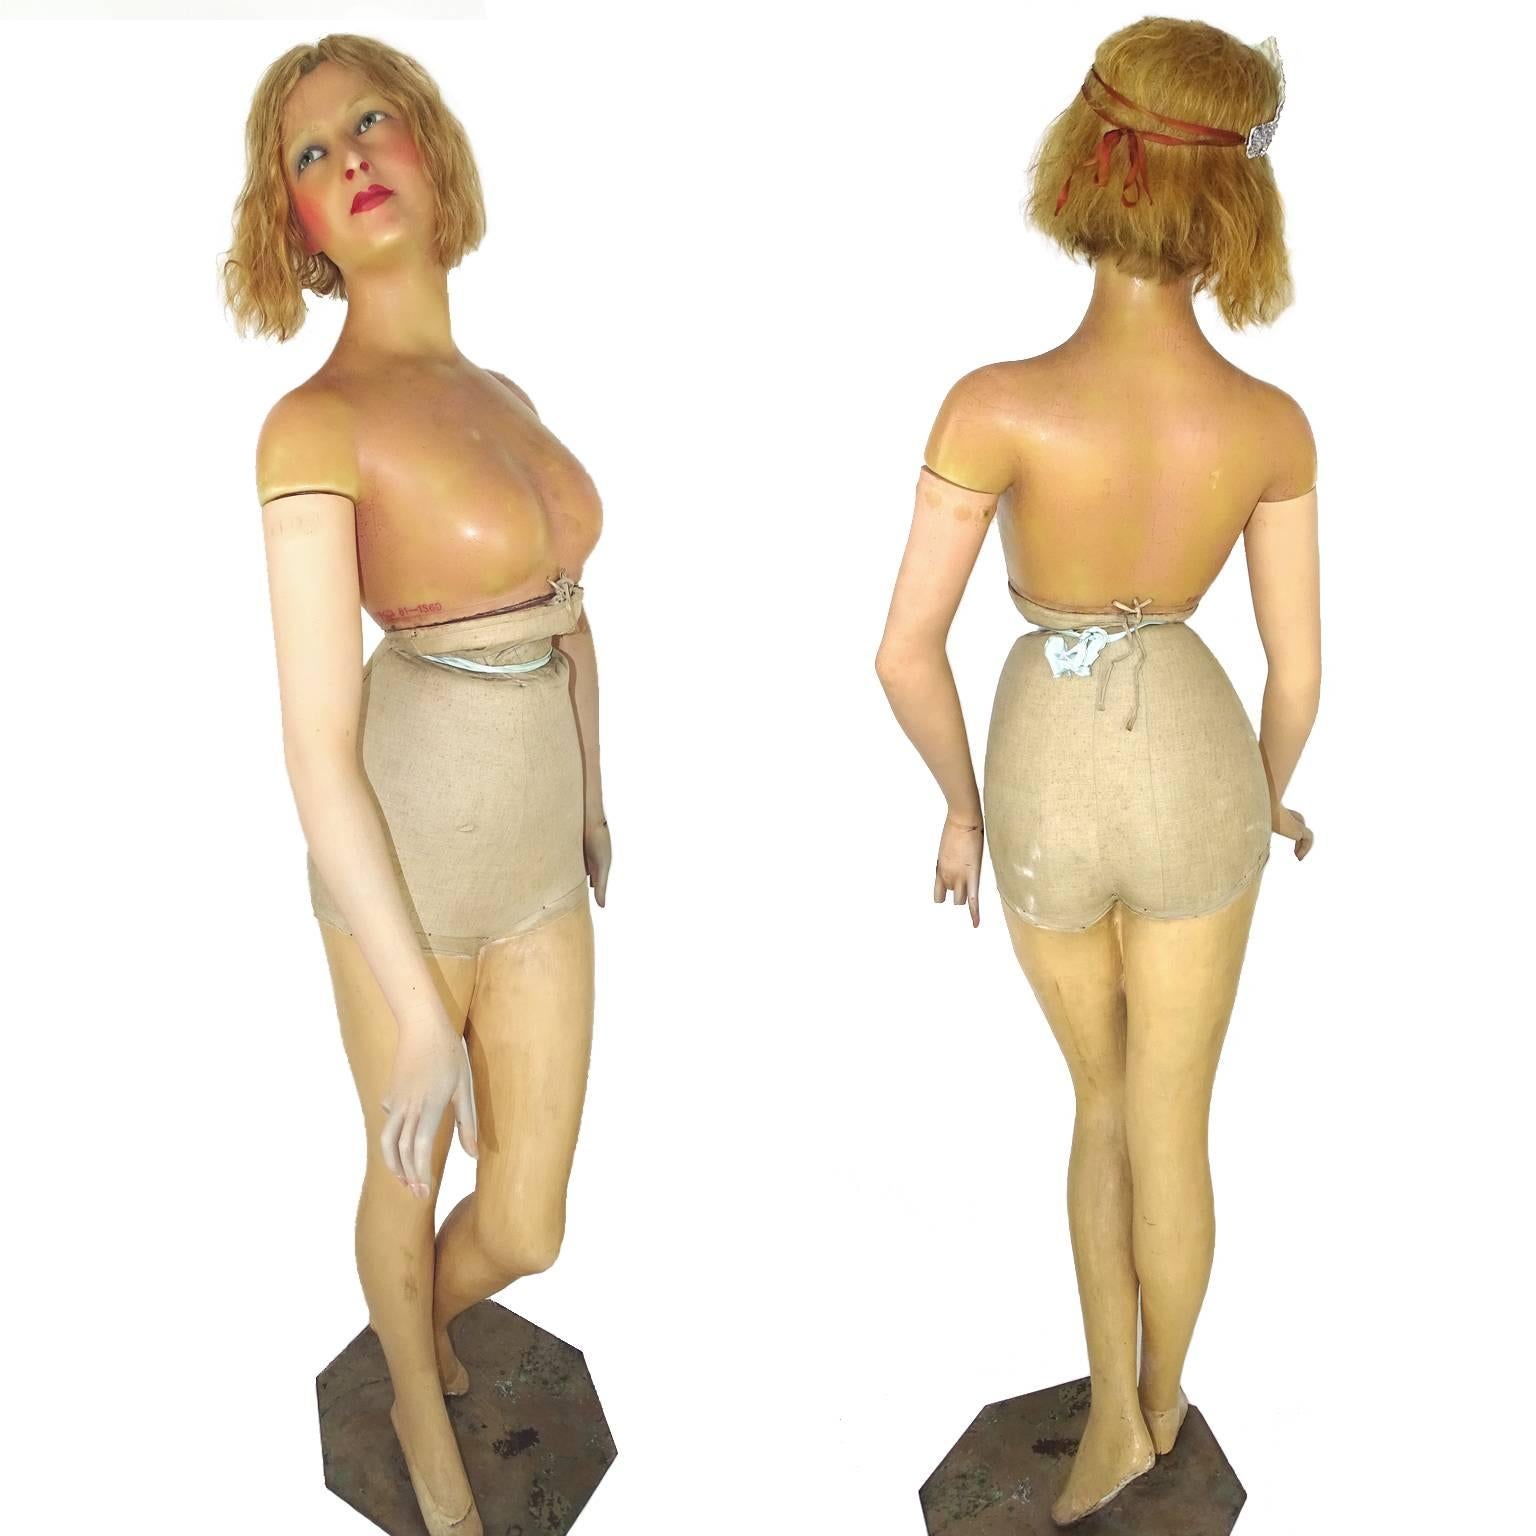 A beautiful antique French full-size wax mannequin made by the famous French maker P. Imans, she's from circa 1910-1920, these kind of mannequins were used for showing clothing, hats and jewelry collections in the exclusive, French 